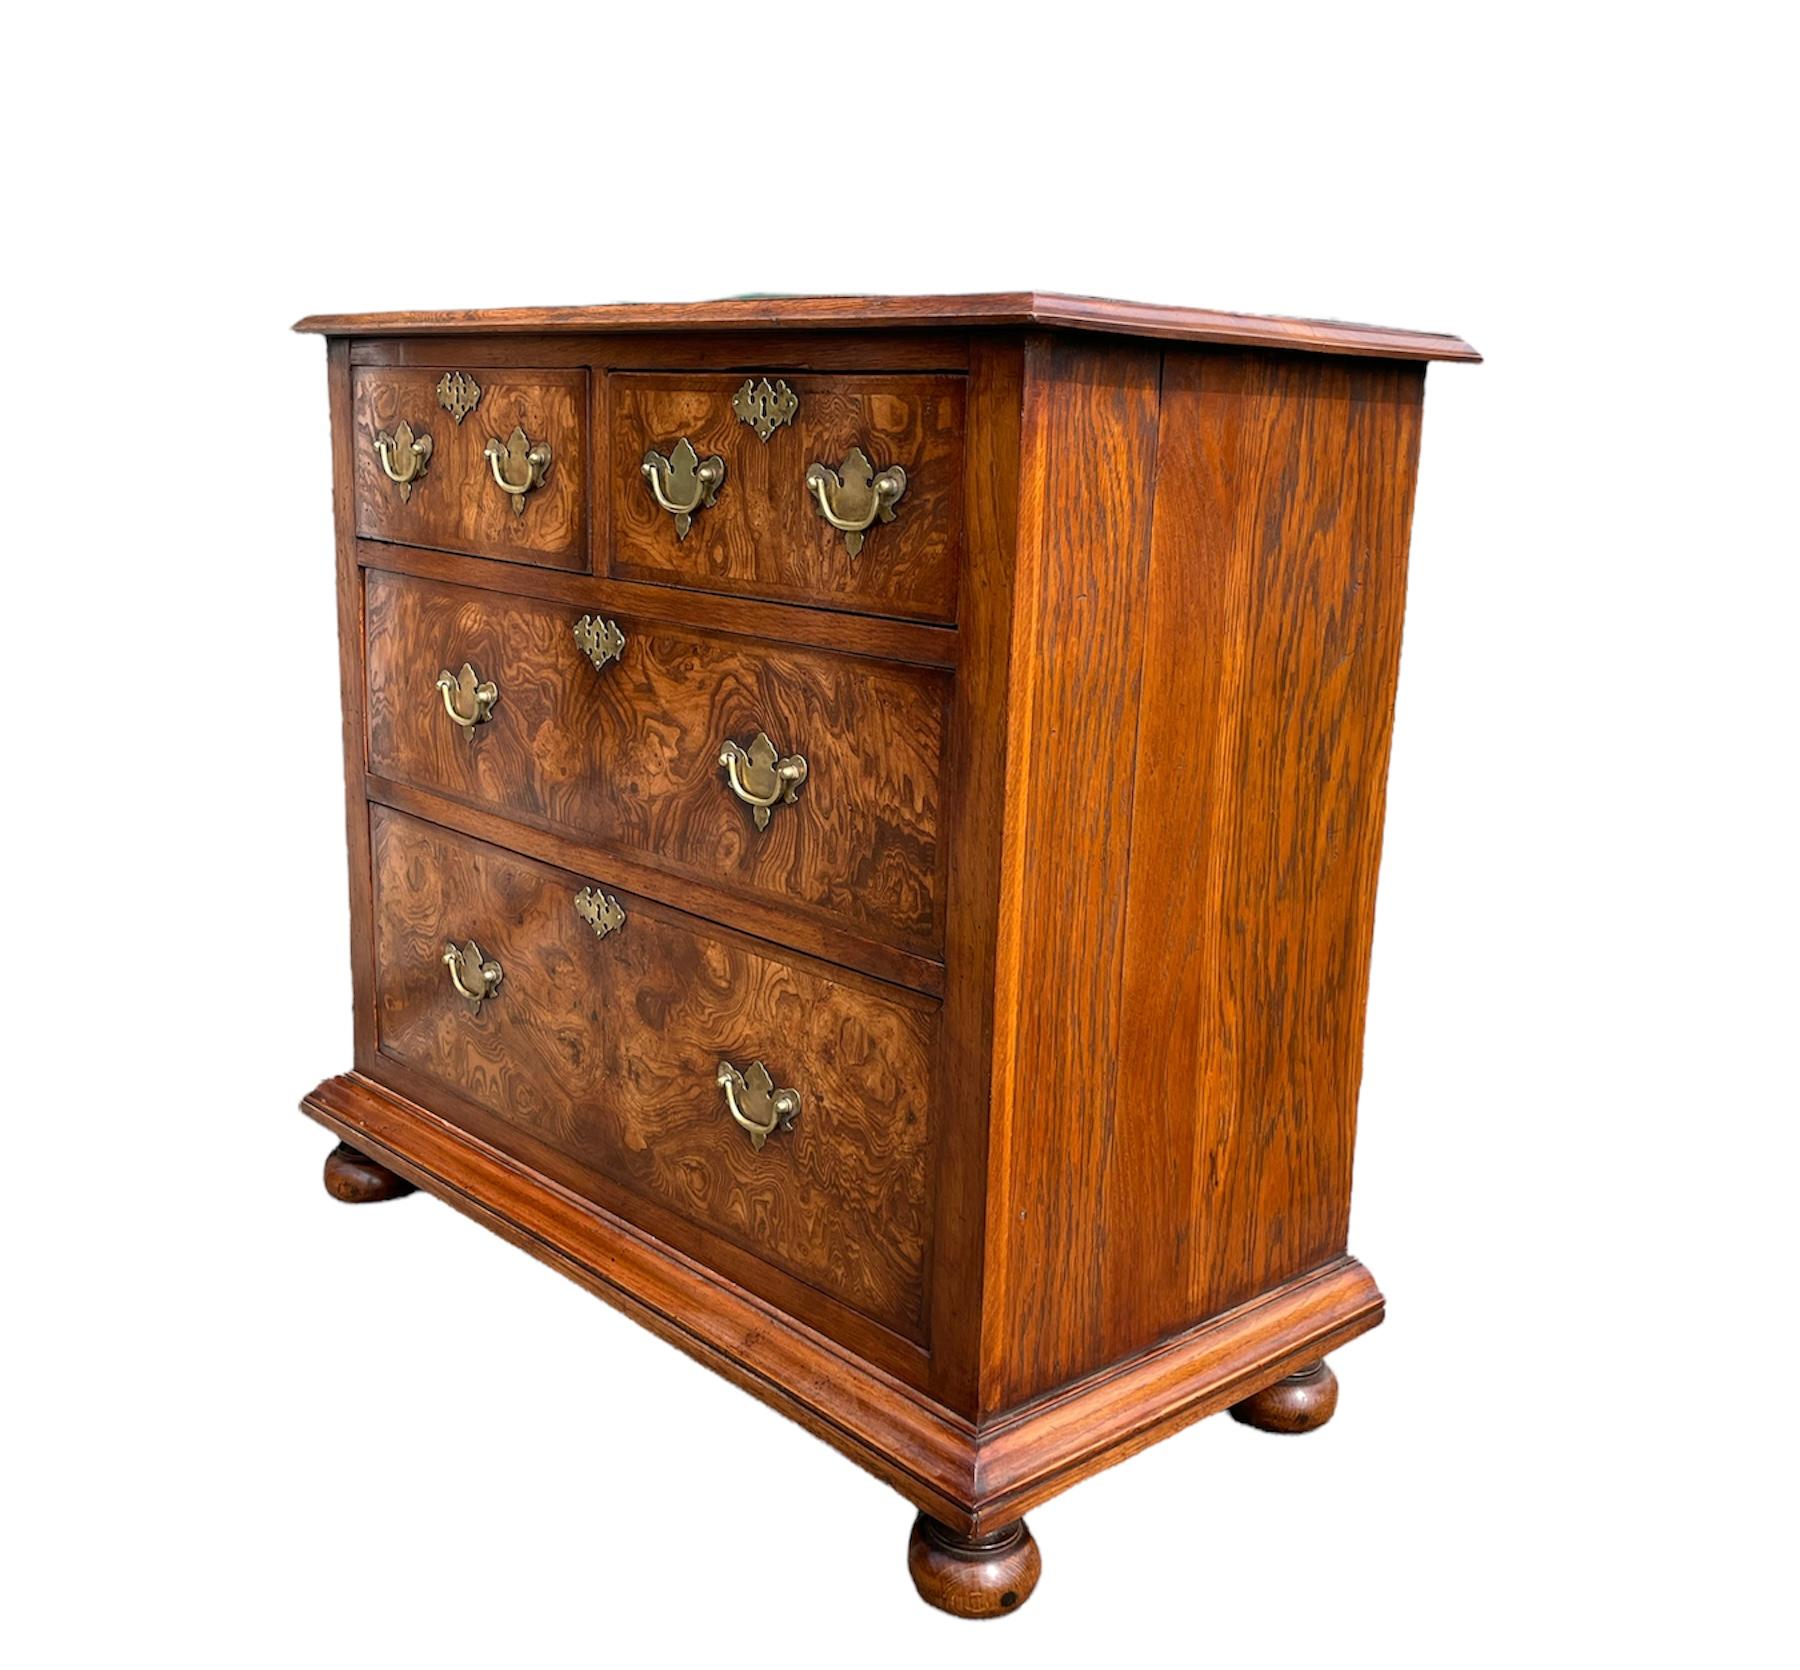 Fine quality rare burr Elm and oak chest of drawers circa 1900 .
The chest has a very unusual grain that really makes this unique .
It is a wonderful size with very good proportions .
The chest has very good brass engraved plate handles